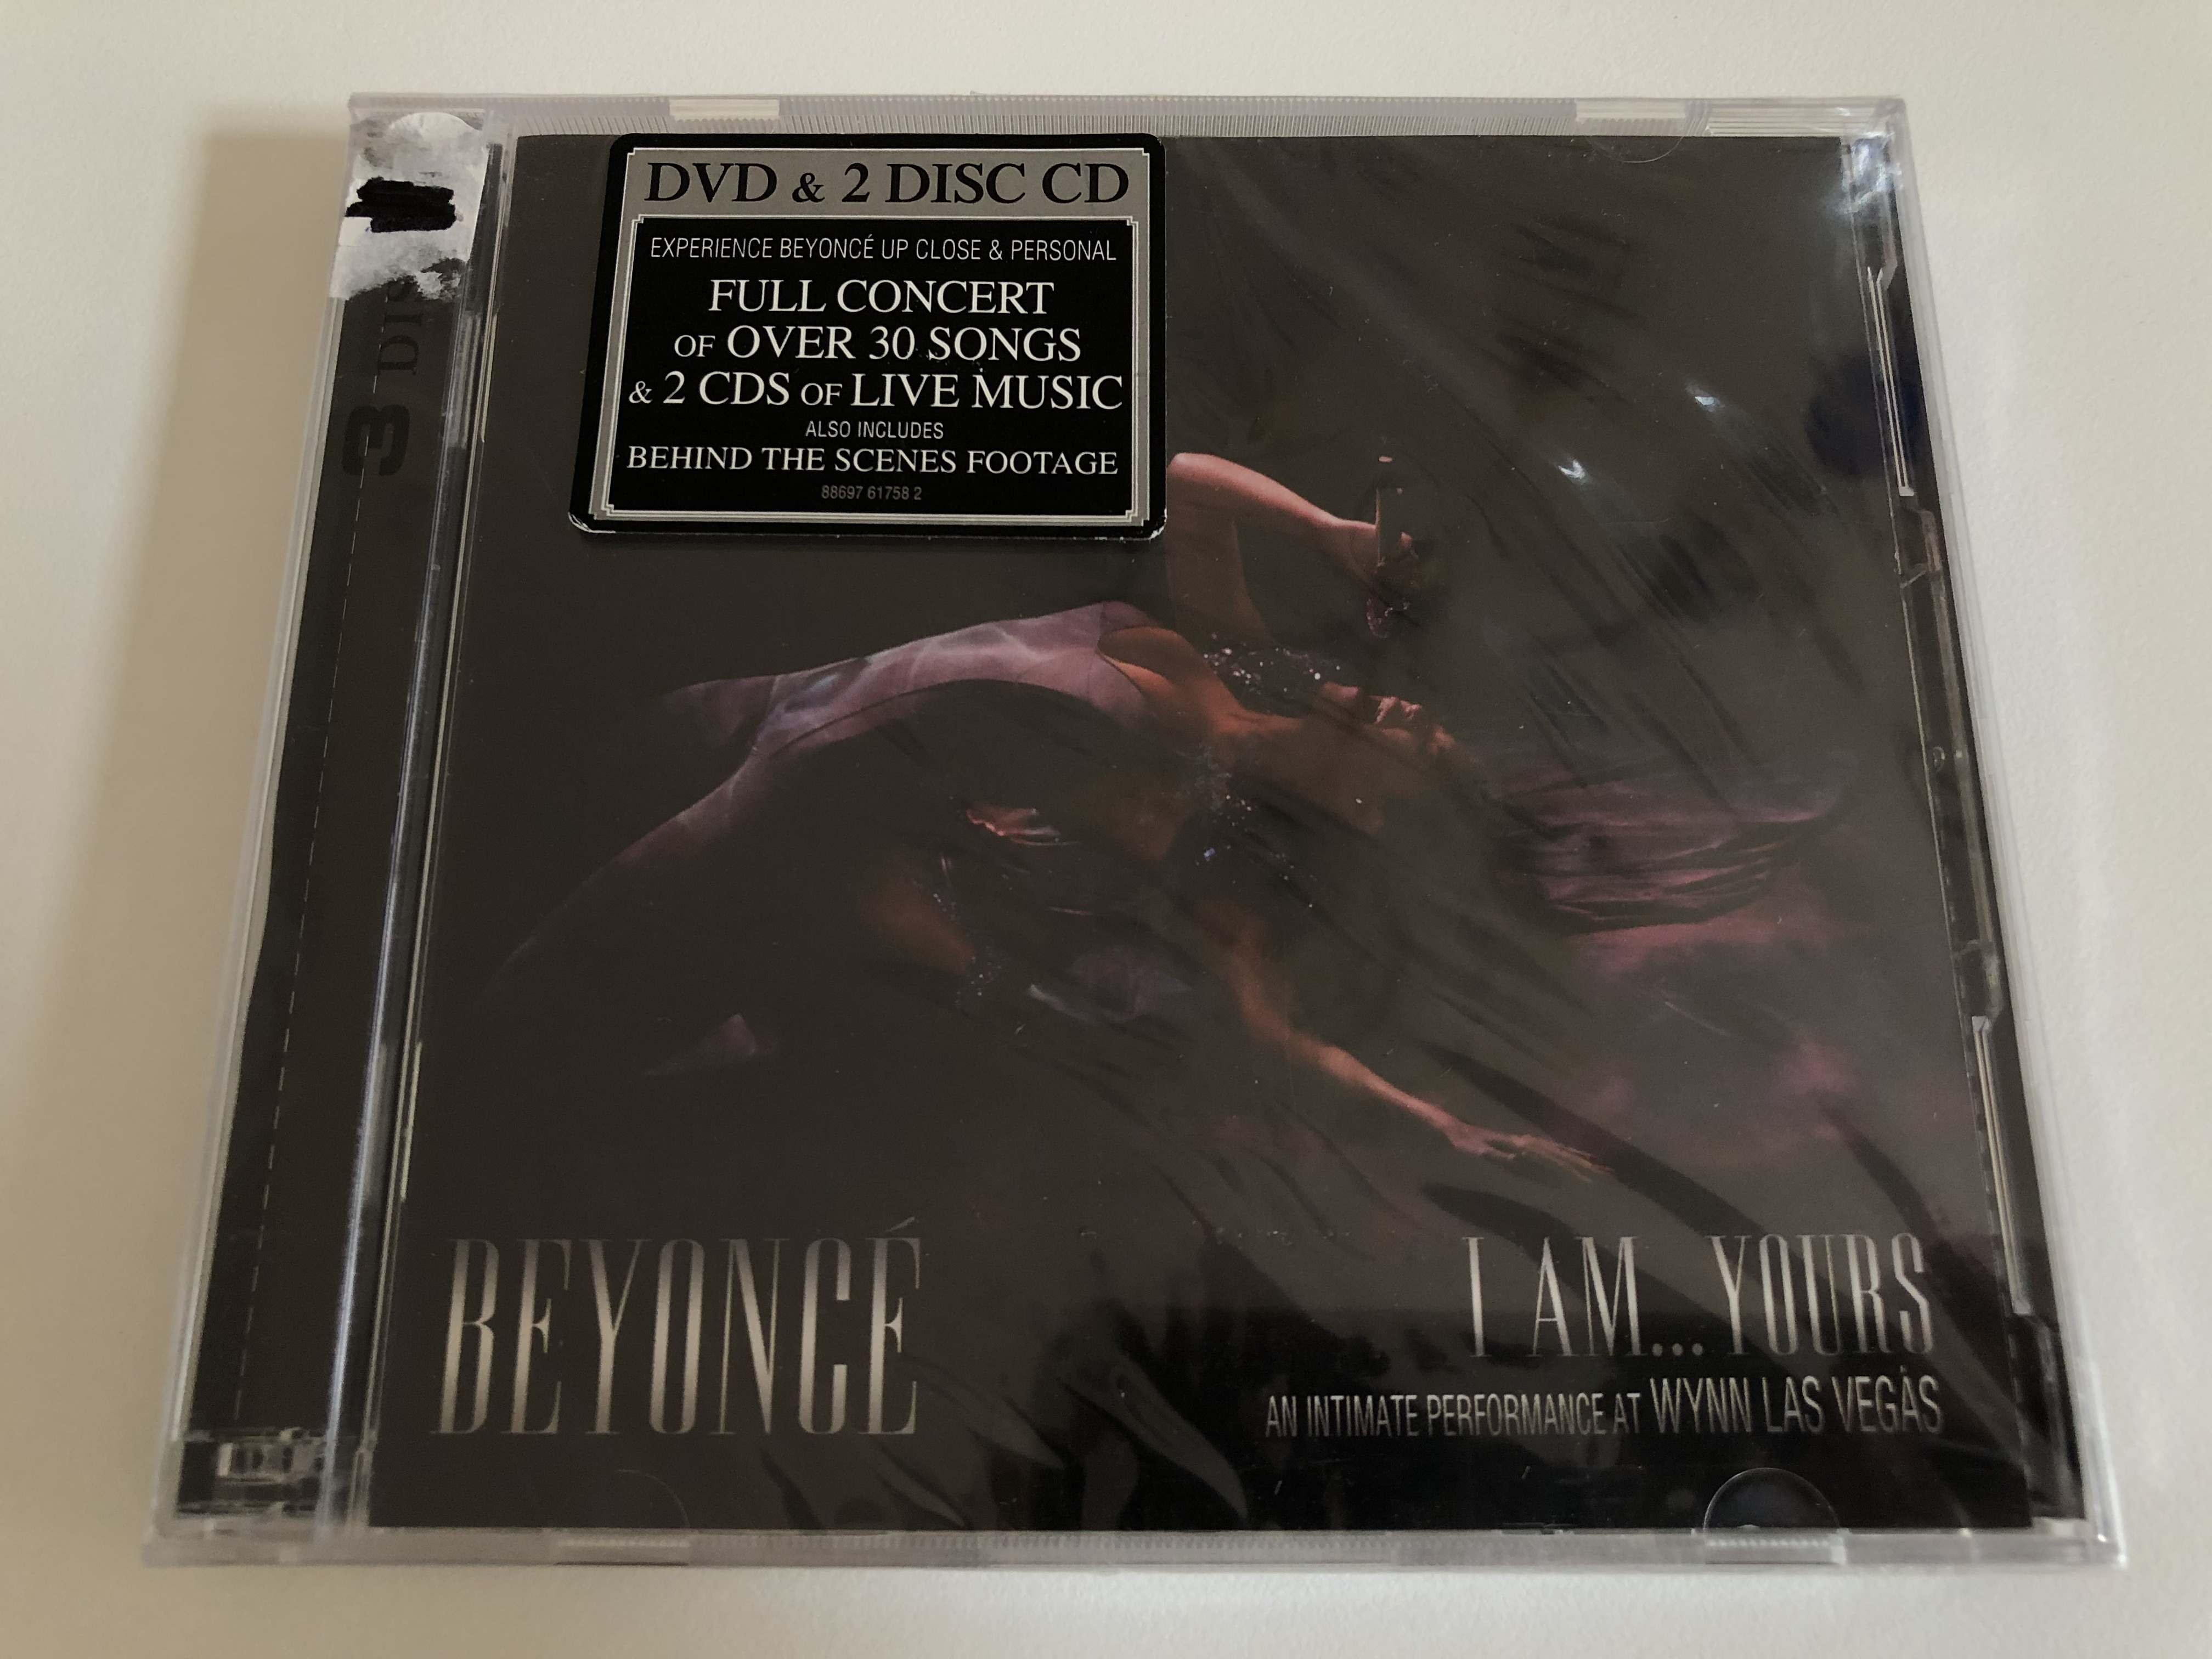 Beyoncé – I Am... Yours: An Intimate Performance At Wynn Las Vegas /  Experience Beyonce Up Close & Personal Full Concert Of Over 30 Songs & 2  CDs Of Live Music /